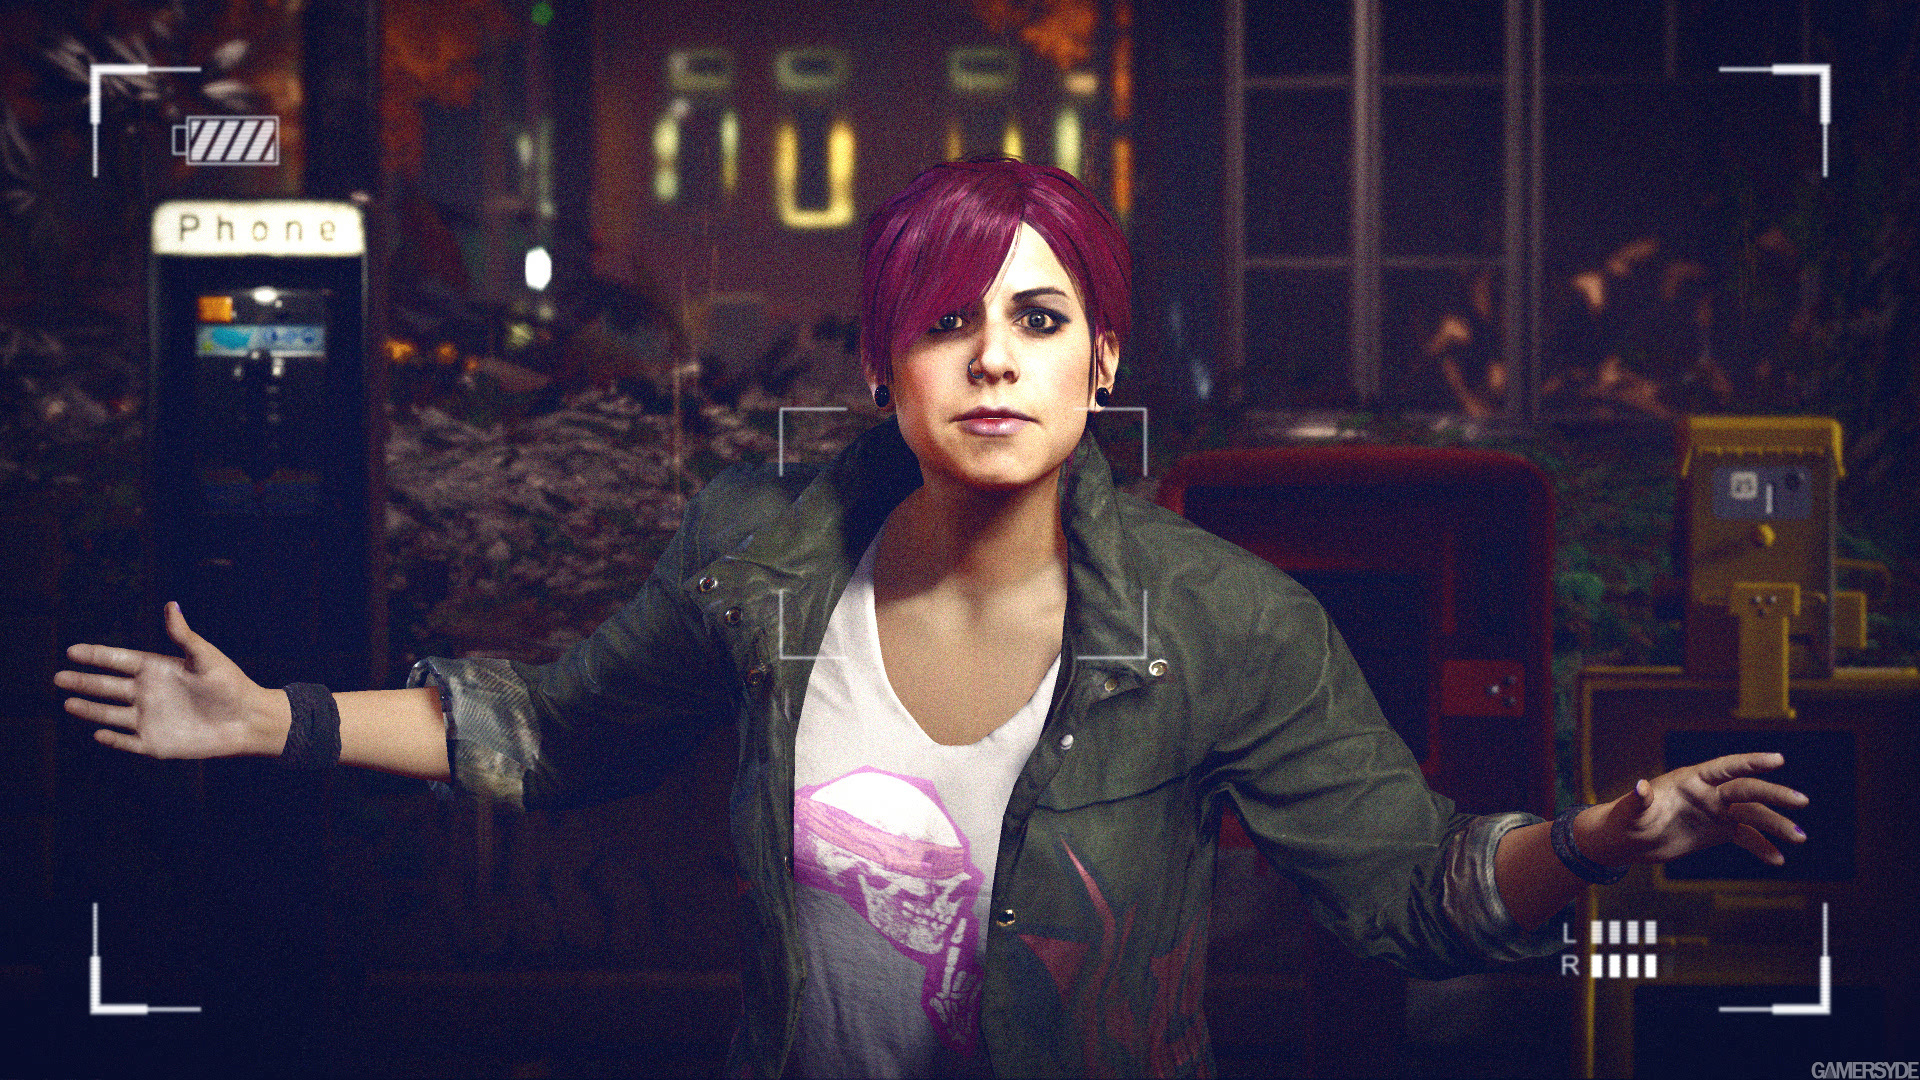 image_infamous_second_son-22858-2661_0002.jpg